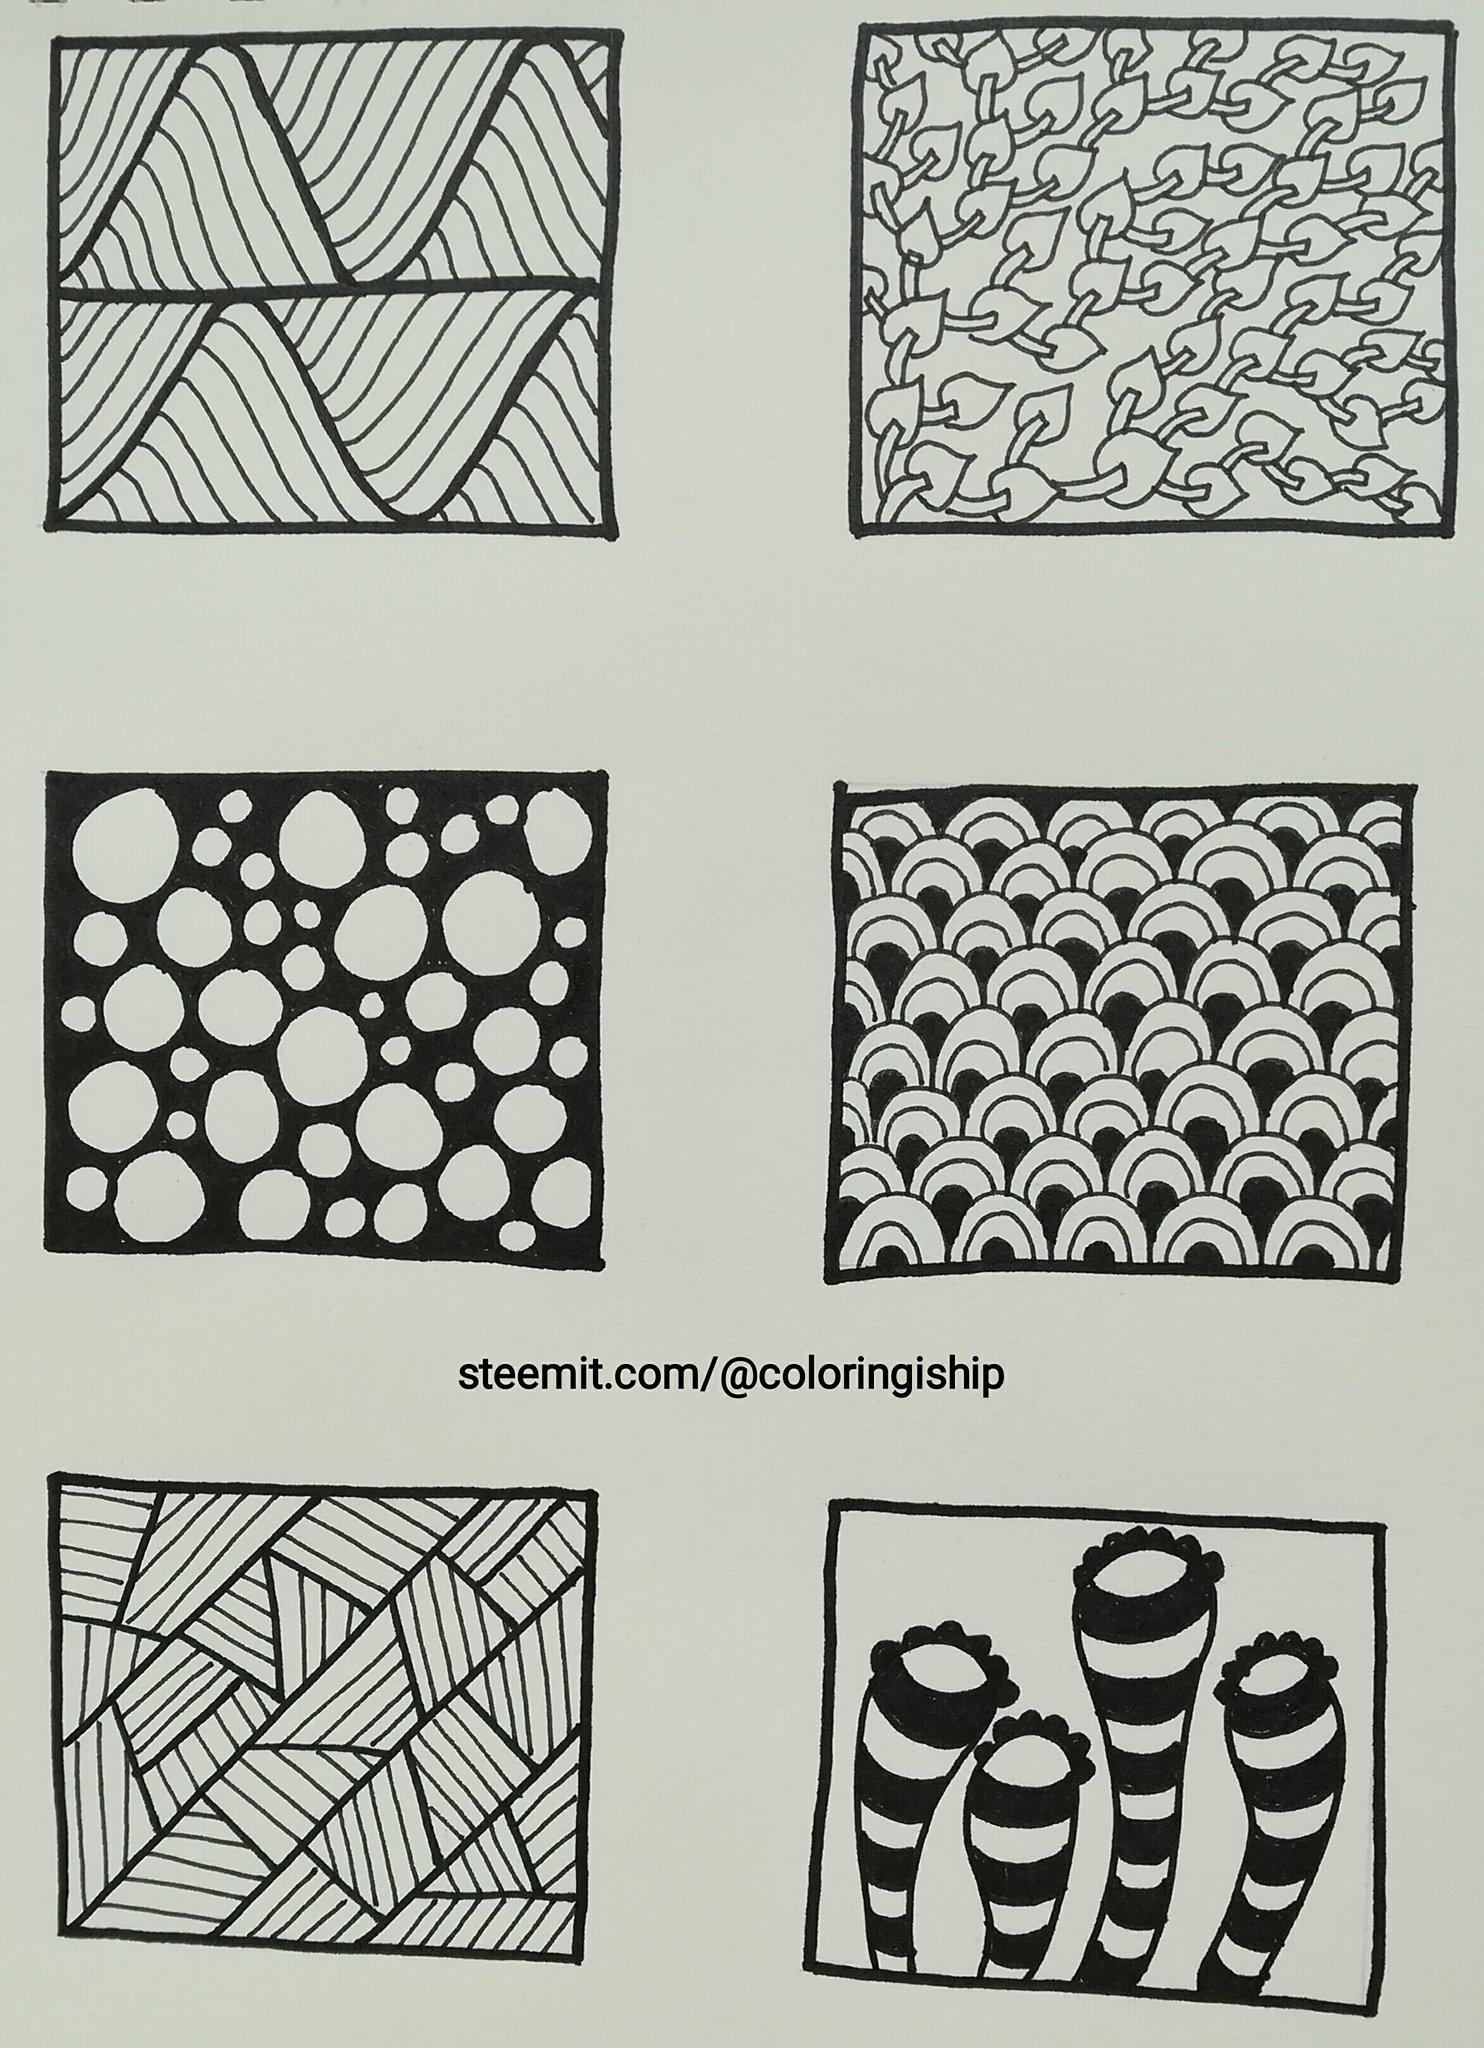 Easy Patterns To Draw Beginners - Easy Patterns To Draw Design Your Own